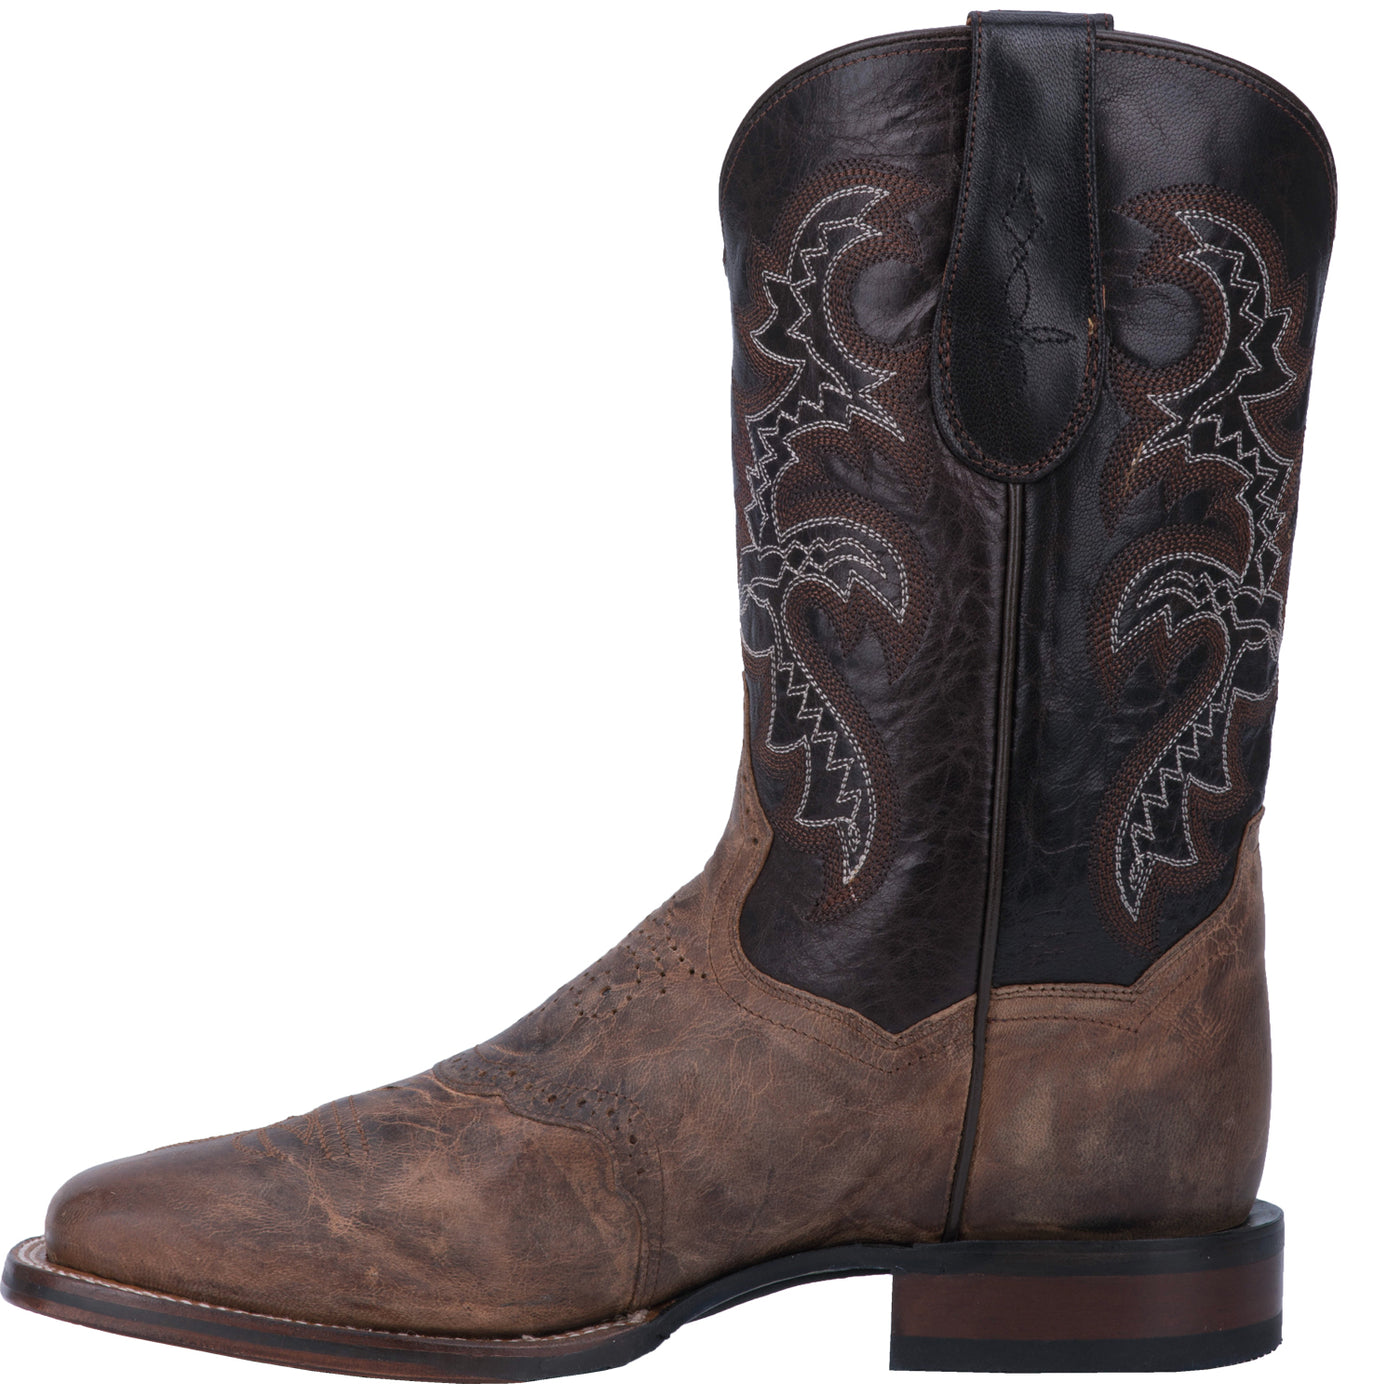 It's no wonder the Cowboy Certified Franklin boot is the most popular style in the line. This rugged, yet refined boot features a sand mad cat leather foot and black leather shaft. Fully leather lined with an Ultimate Gel-Flex insole, double-stitched welt, broad square toe, and 7/8” Stockman heel.  Style: DP2815